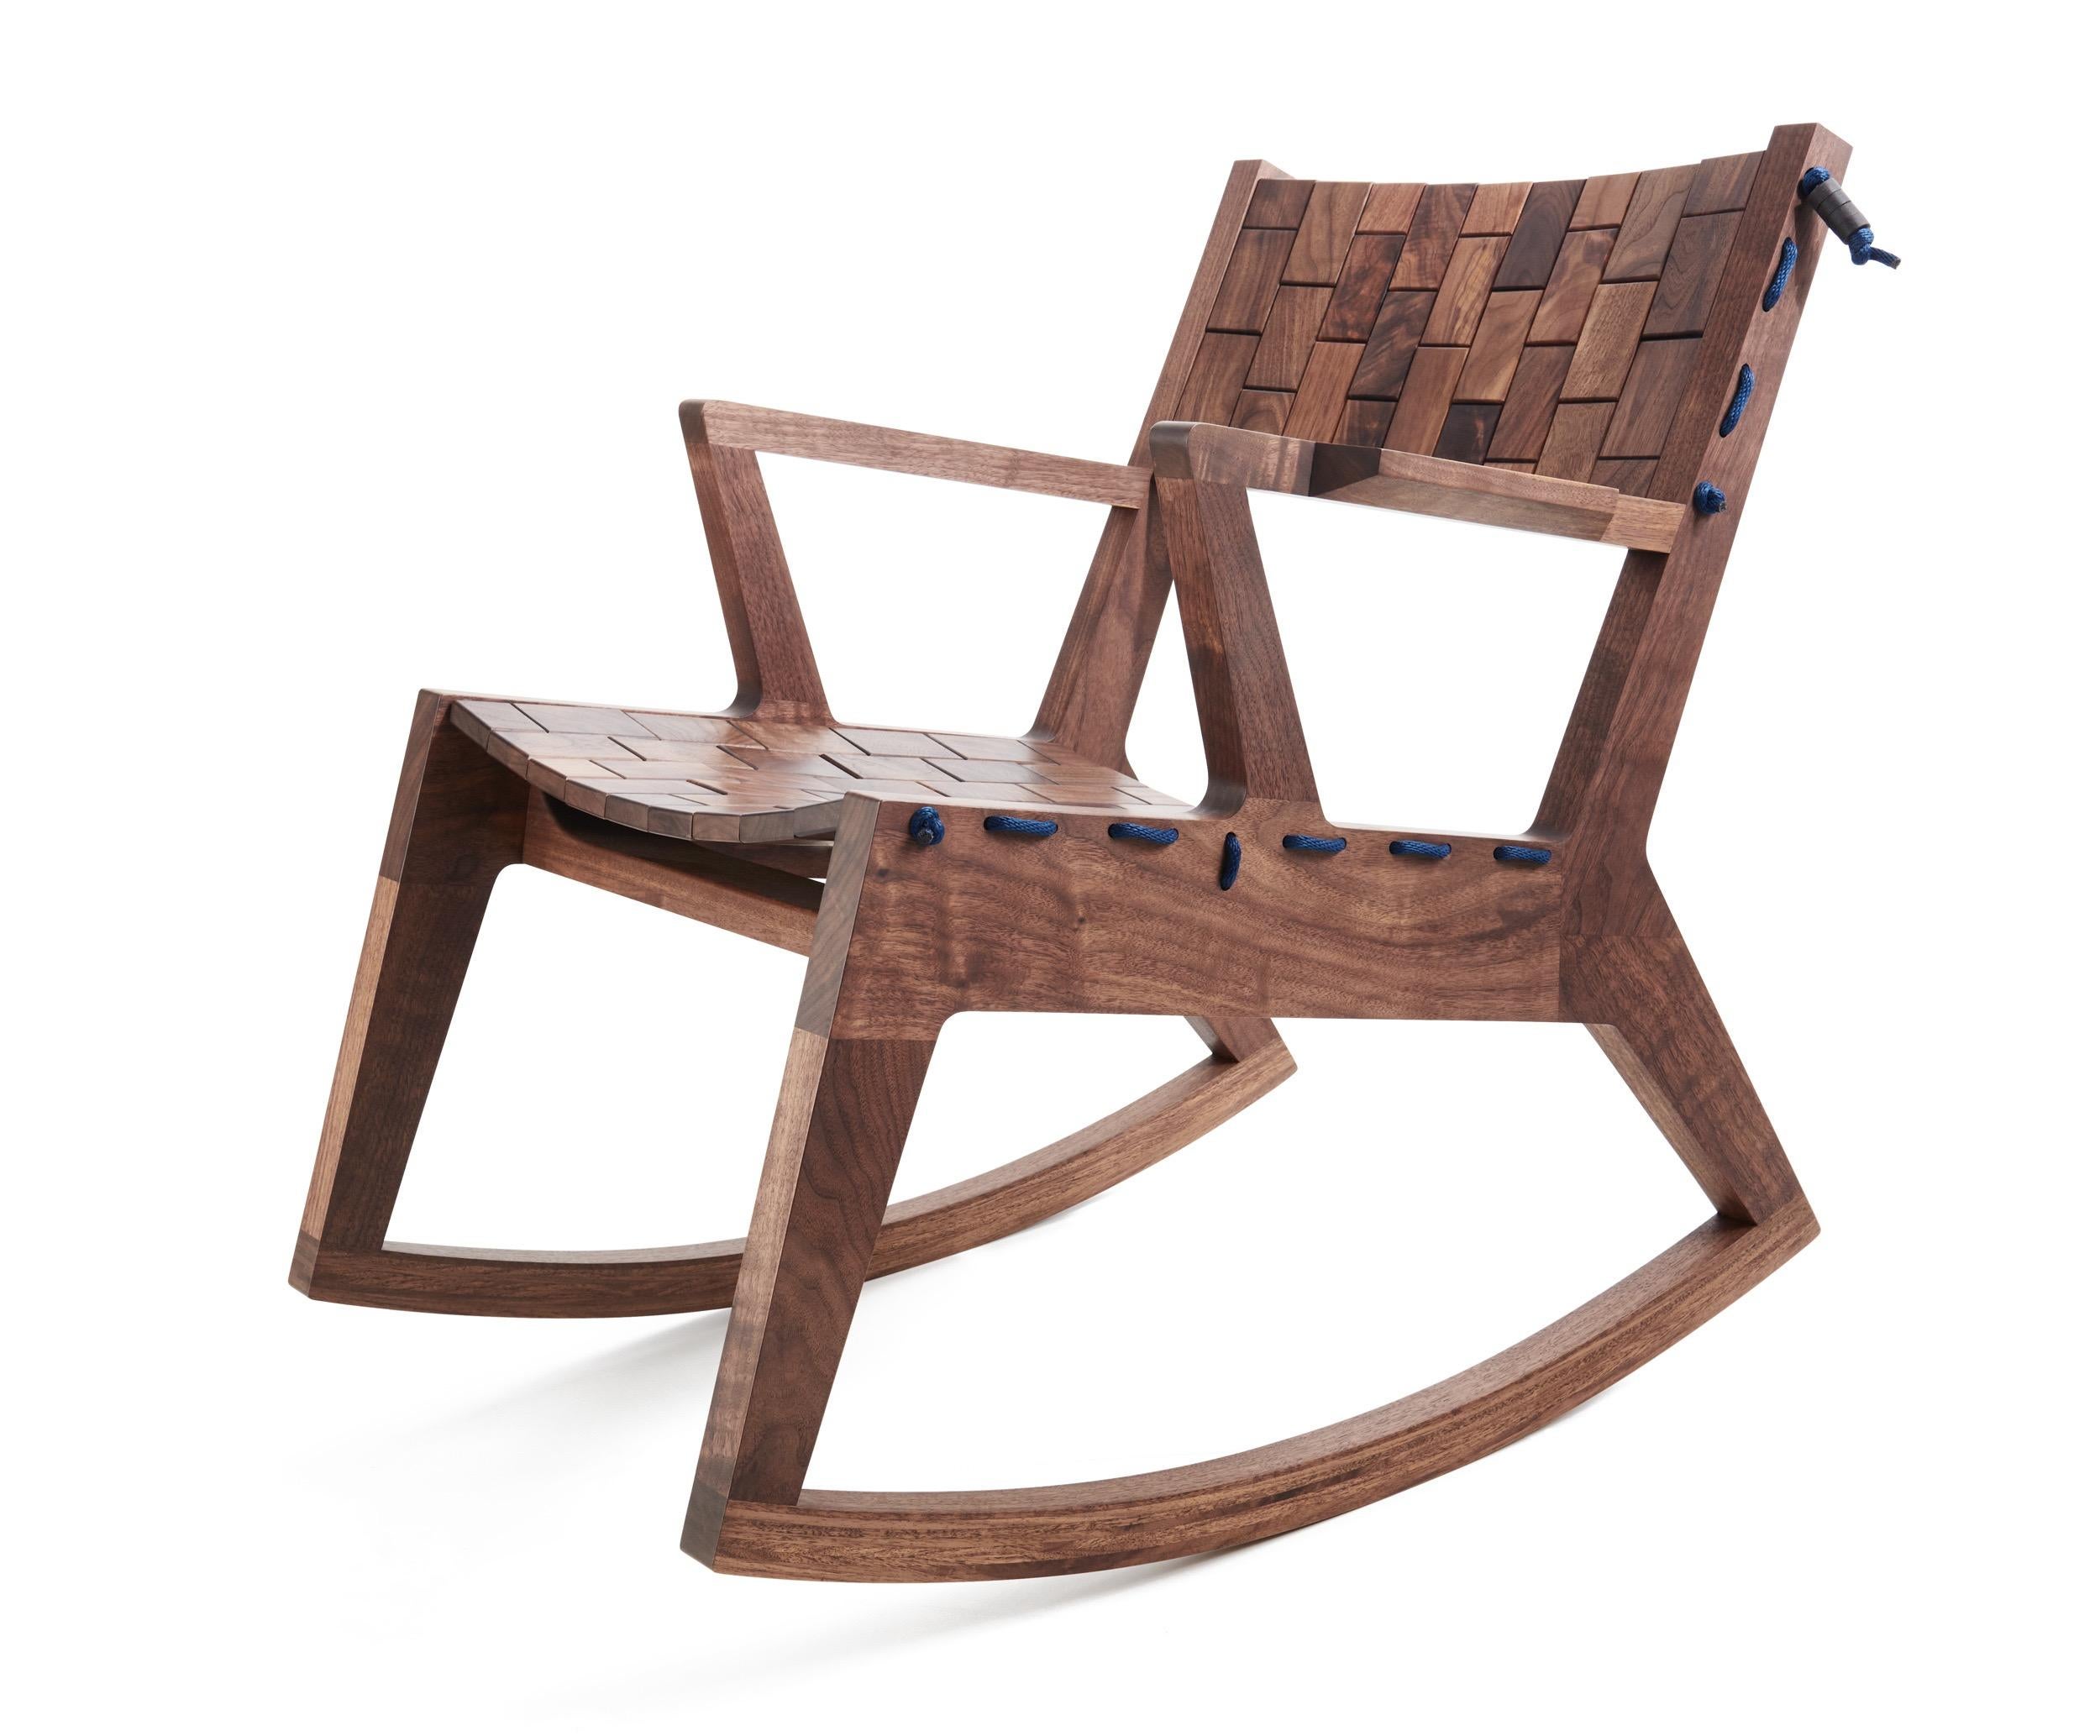 Woodsport RB rocking chair. Named after the running bond pattern in which bricks are laid. Individual pieces are laced together with high grade polyester rope, creating a soft surface that flexes with the occupant. The chair is detailed with burl